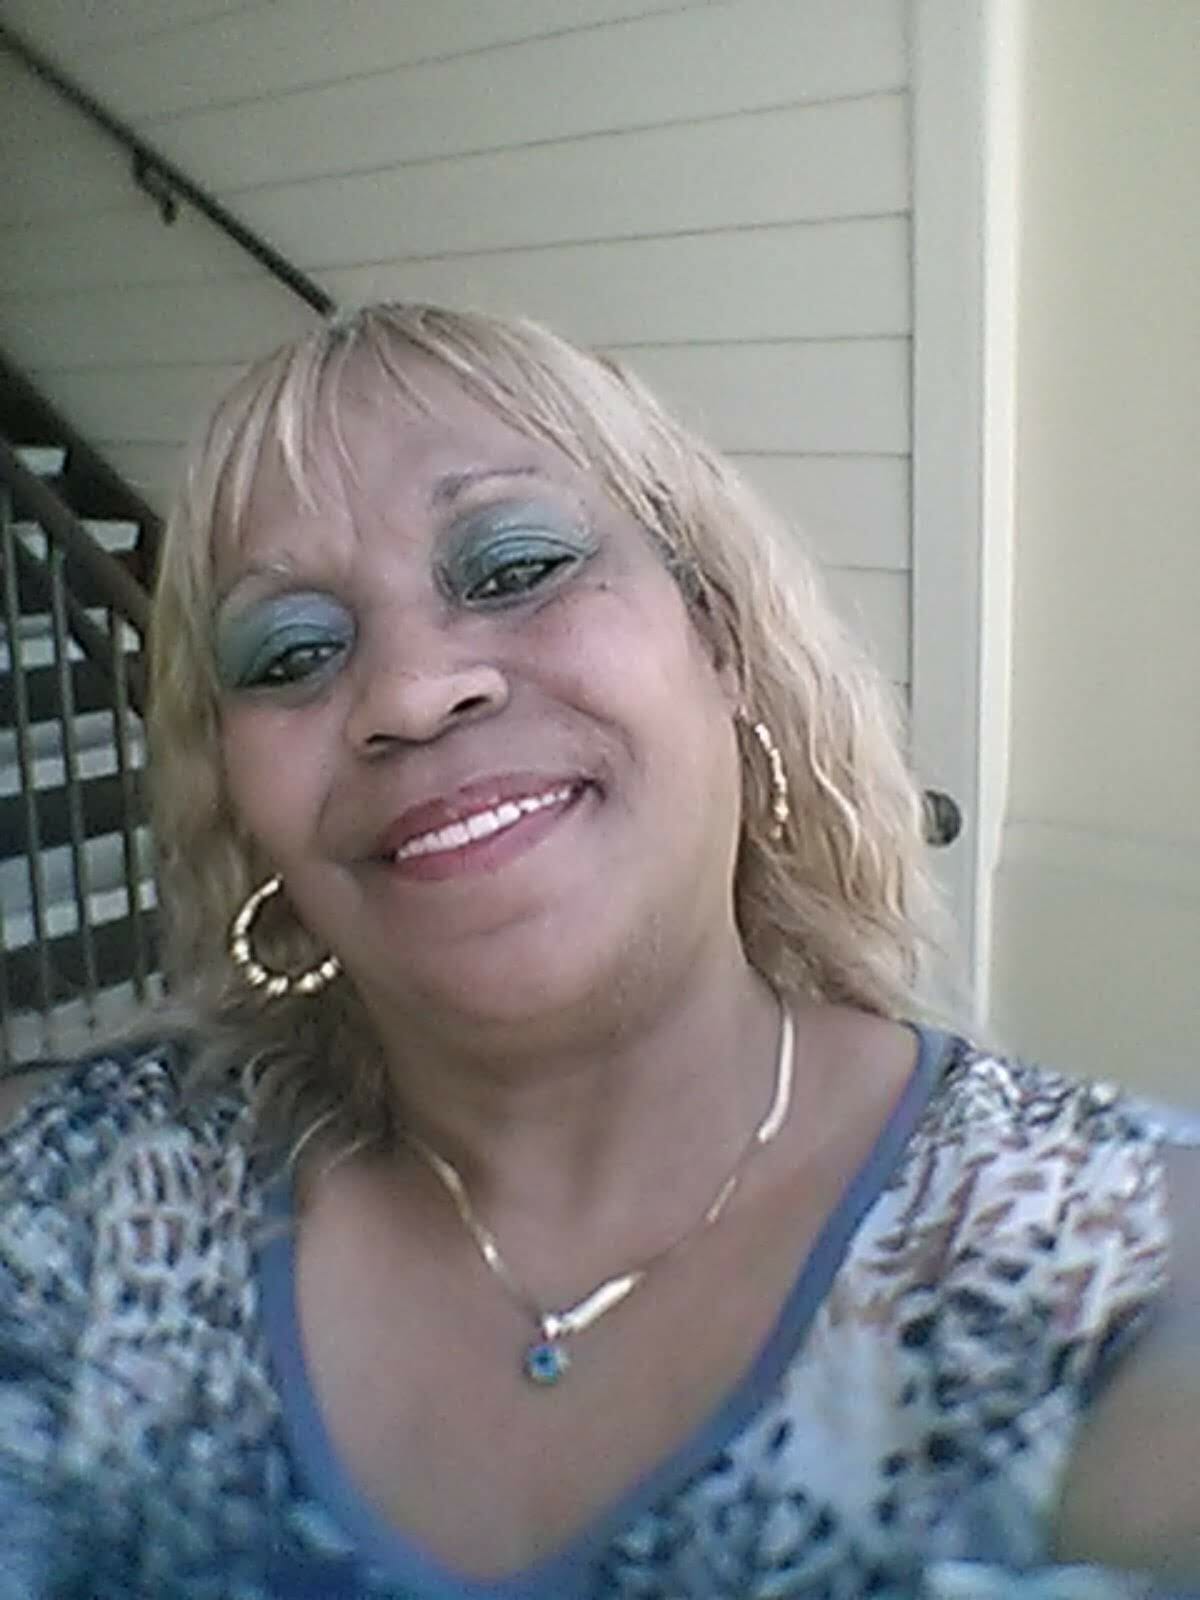 Ashro Woman of the Week, Tracey, a smiling African-American woman with blonde hair and bangs, in a print top.